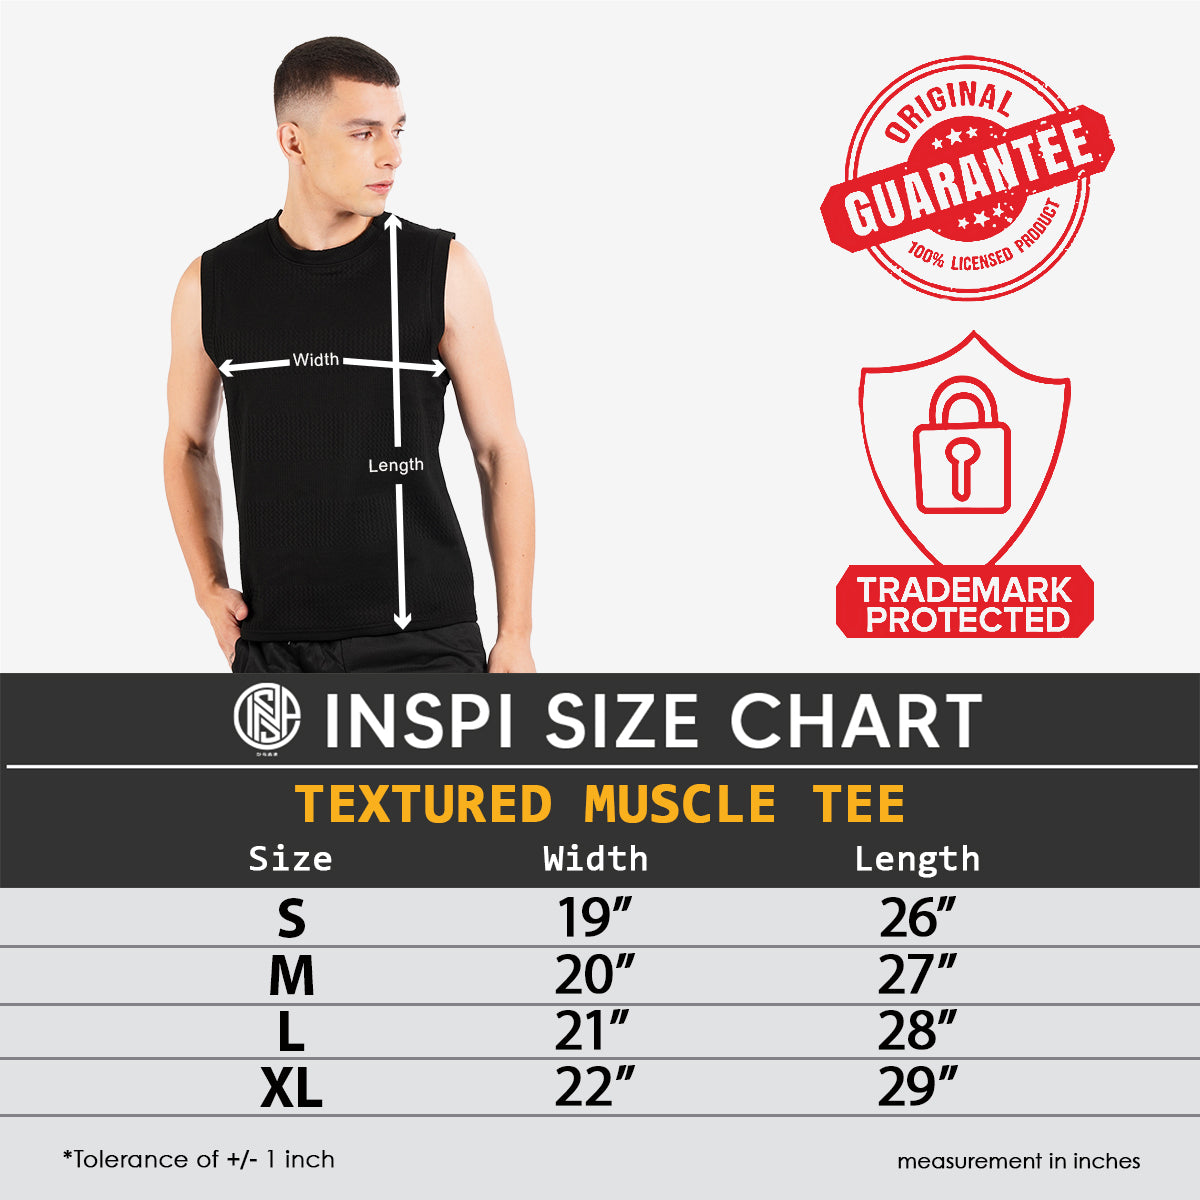 INSPI Textured Muscle Tee Collection For Men Sleeveless Striped Dark Gray Tank Top Sando For Women Gym Workout Clothes Exercise Outfit